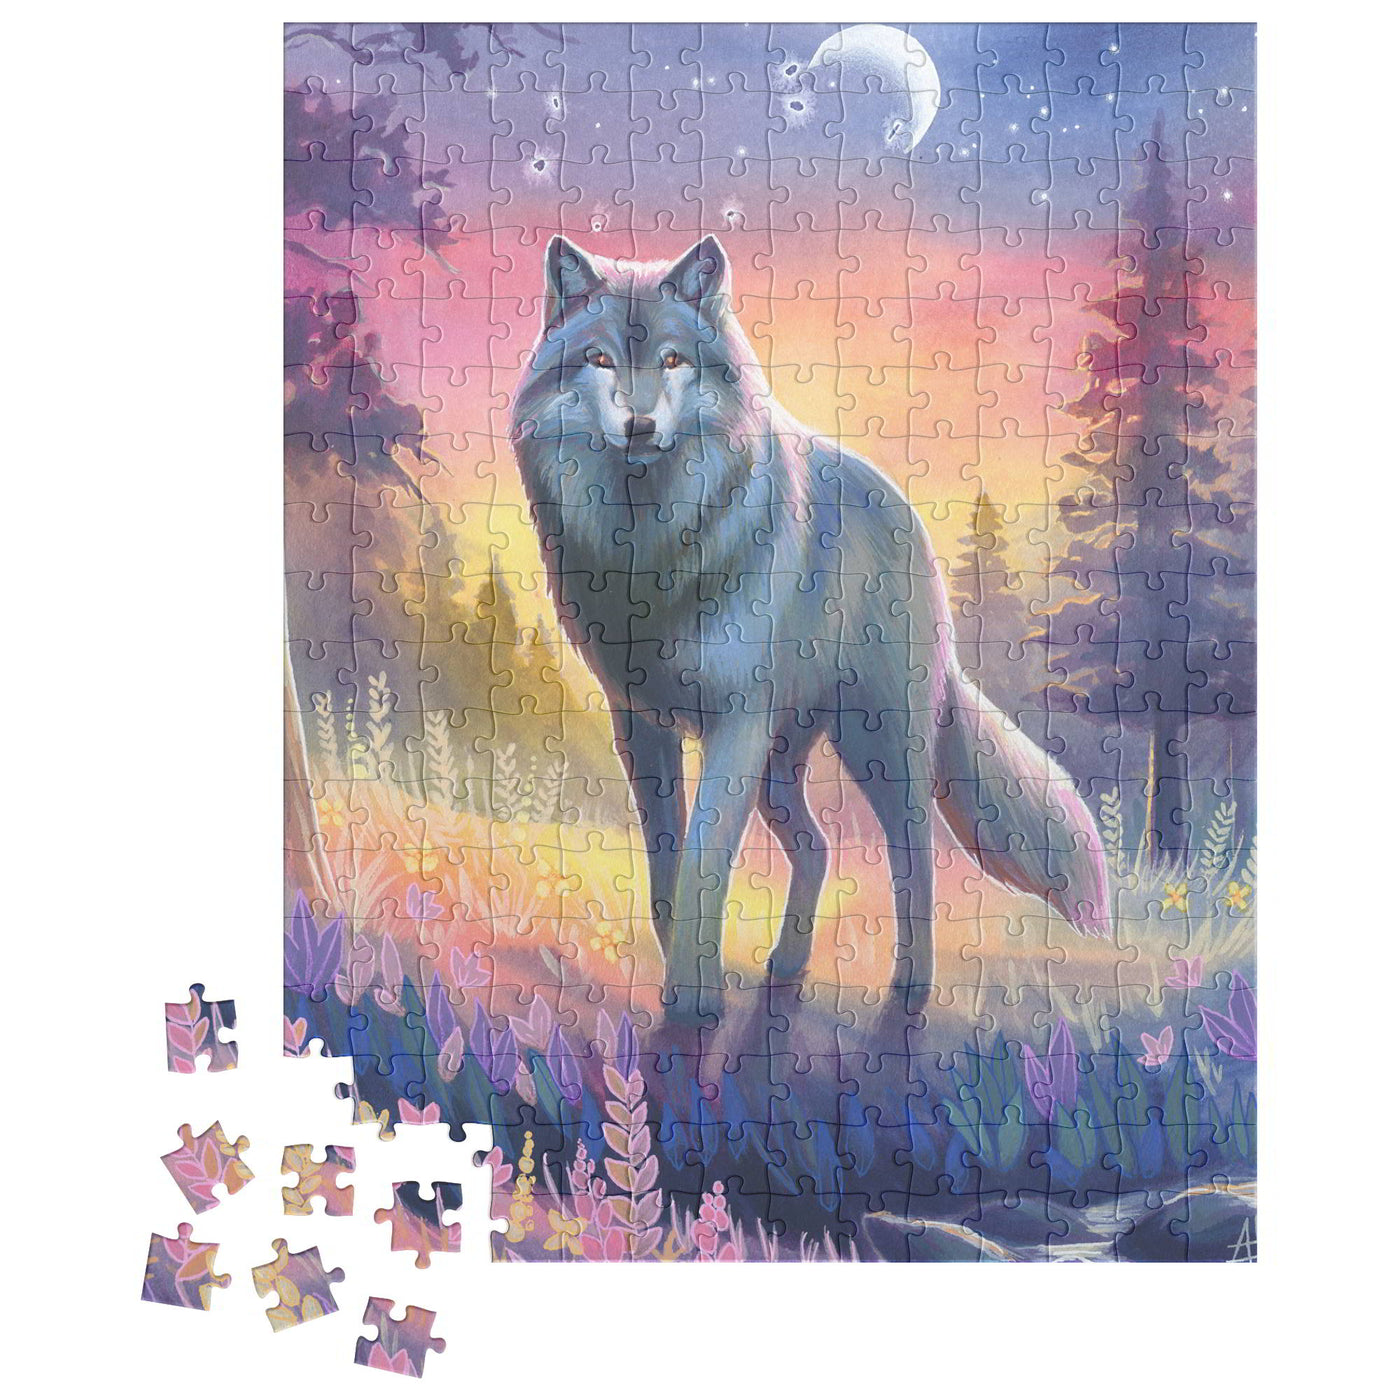 A Wolf Puzzle depicting a wolf in a colorful forest at dusk, with a few pieces yet to be placed, set against a backdrop of a rising moon.